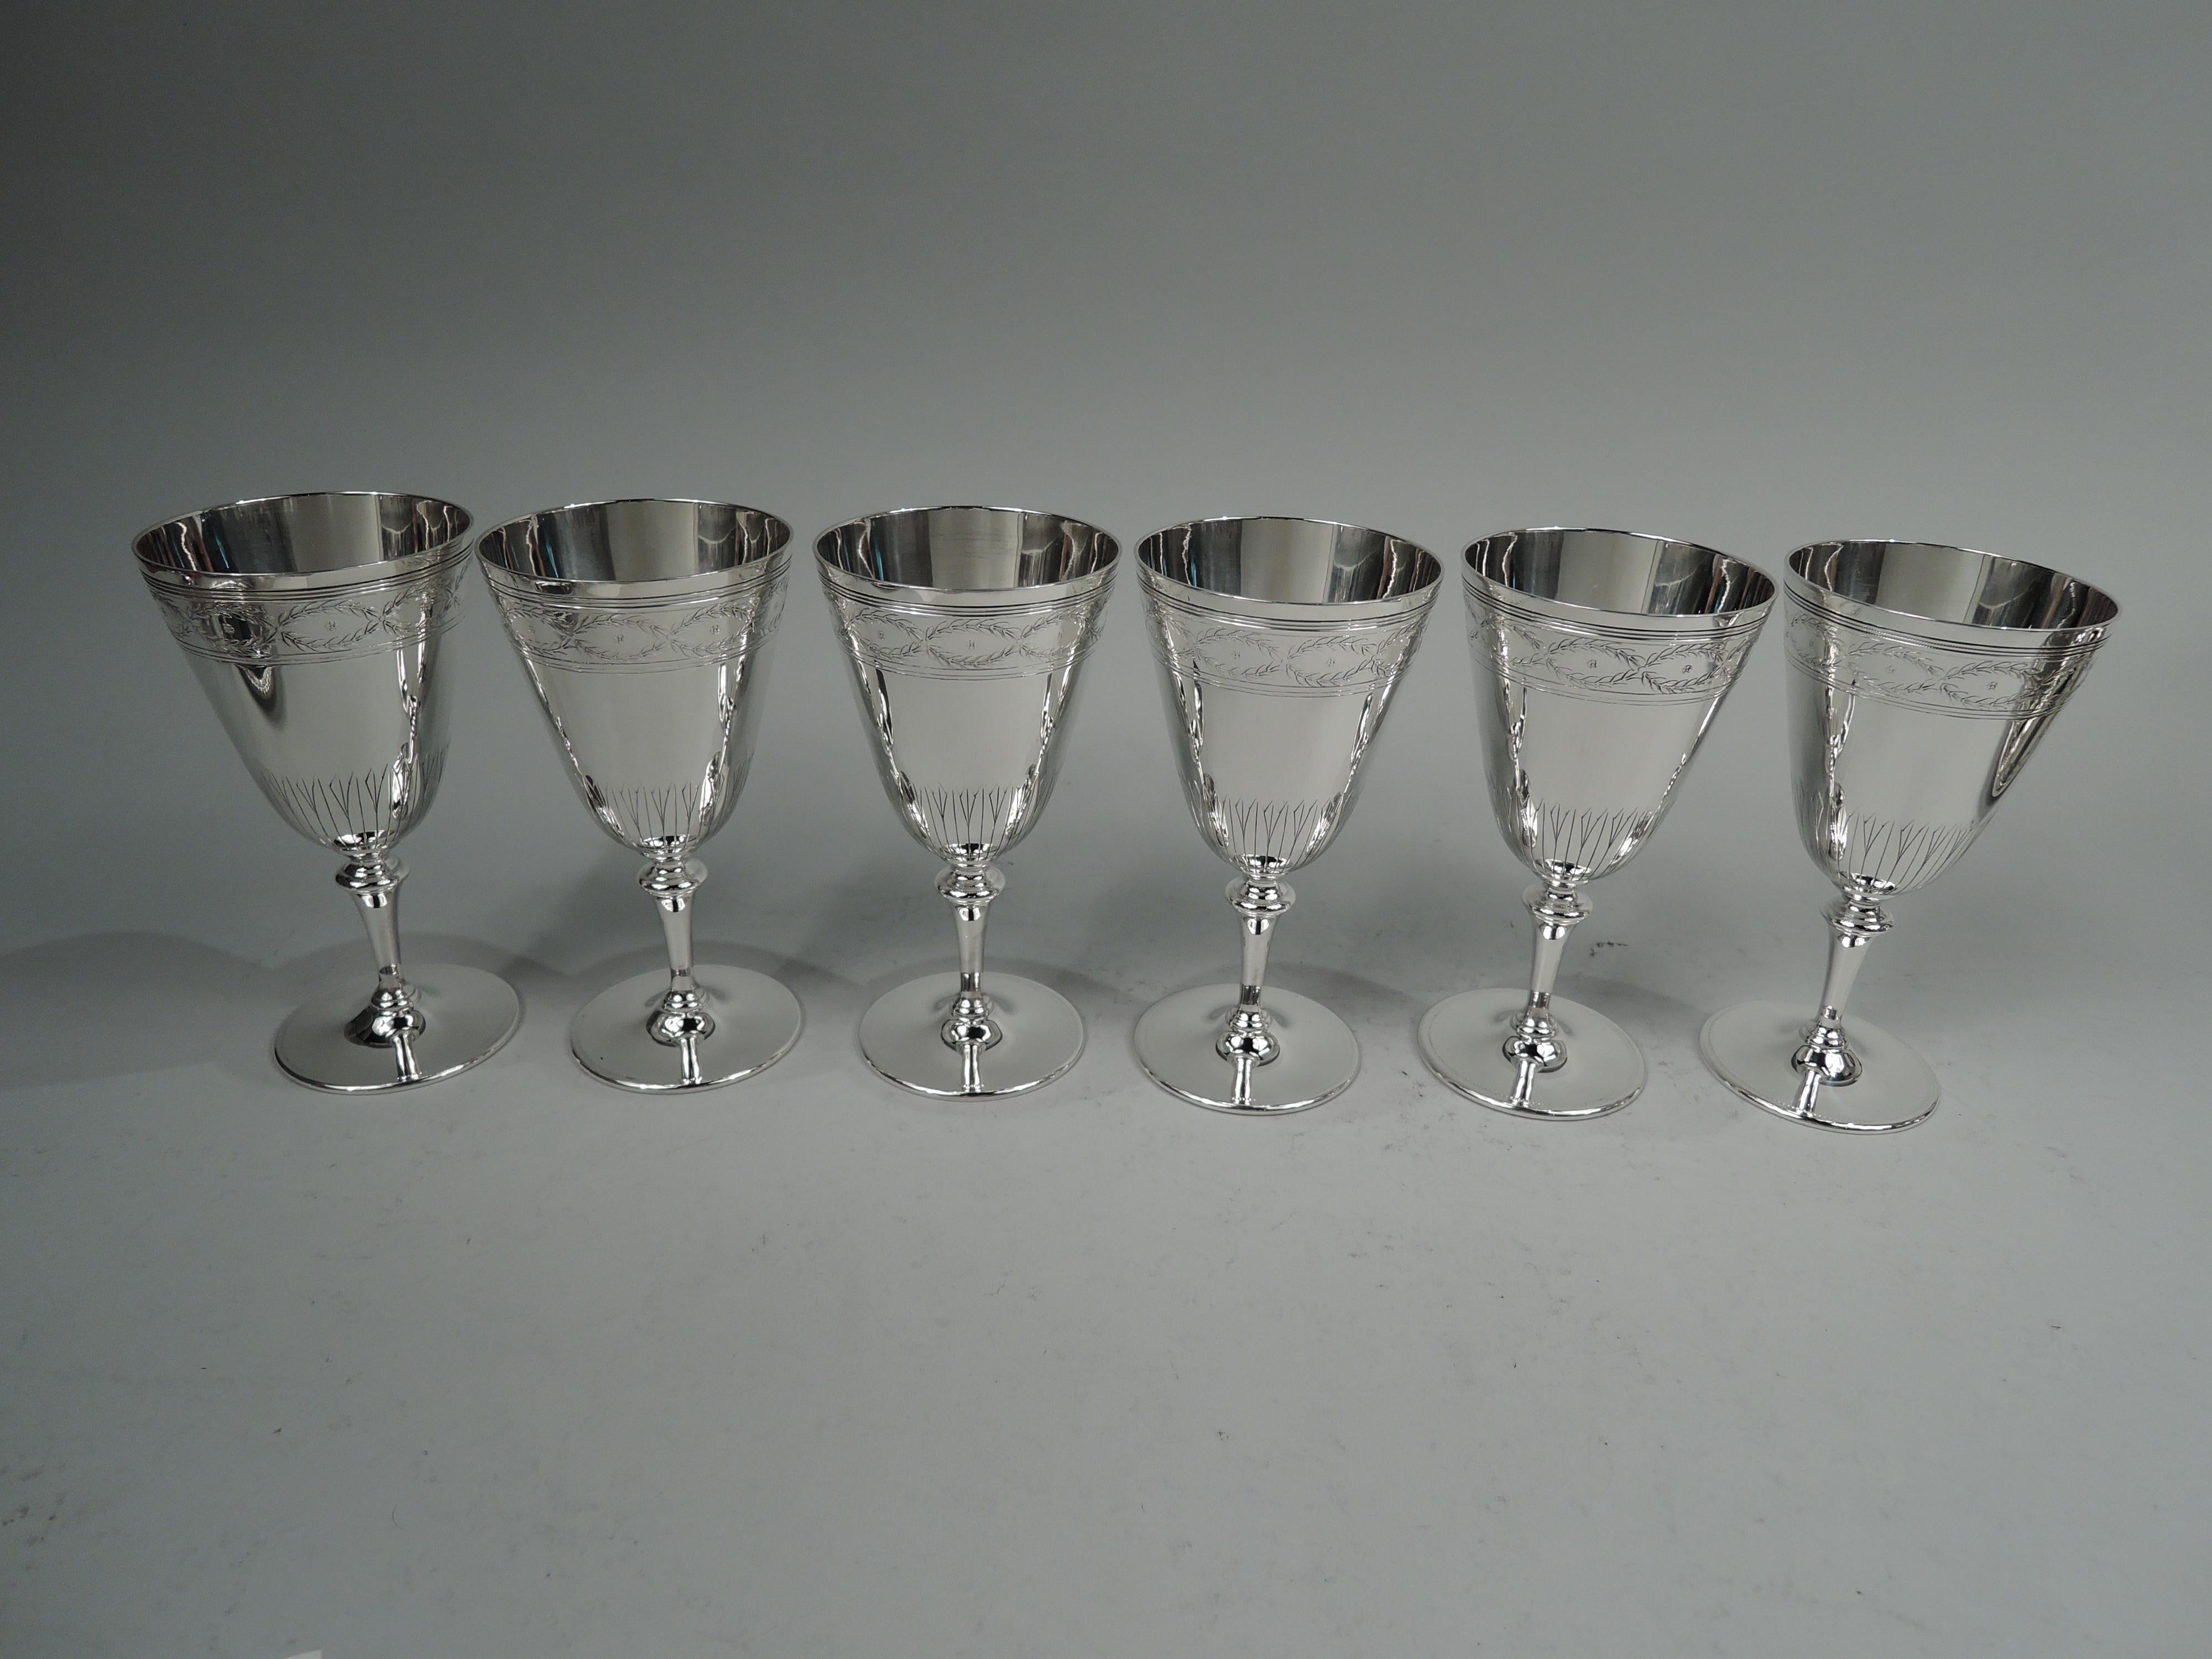 Tiffany Winthrop Drinks Set for 6 with Pitcher & Goblets on Tray For Sale 1